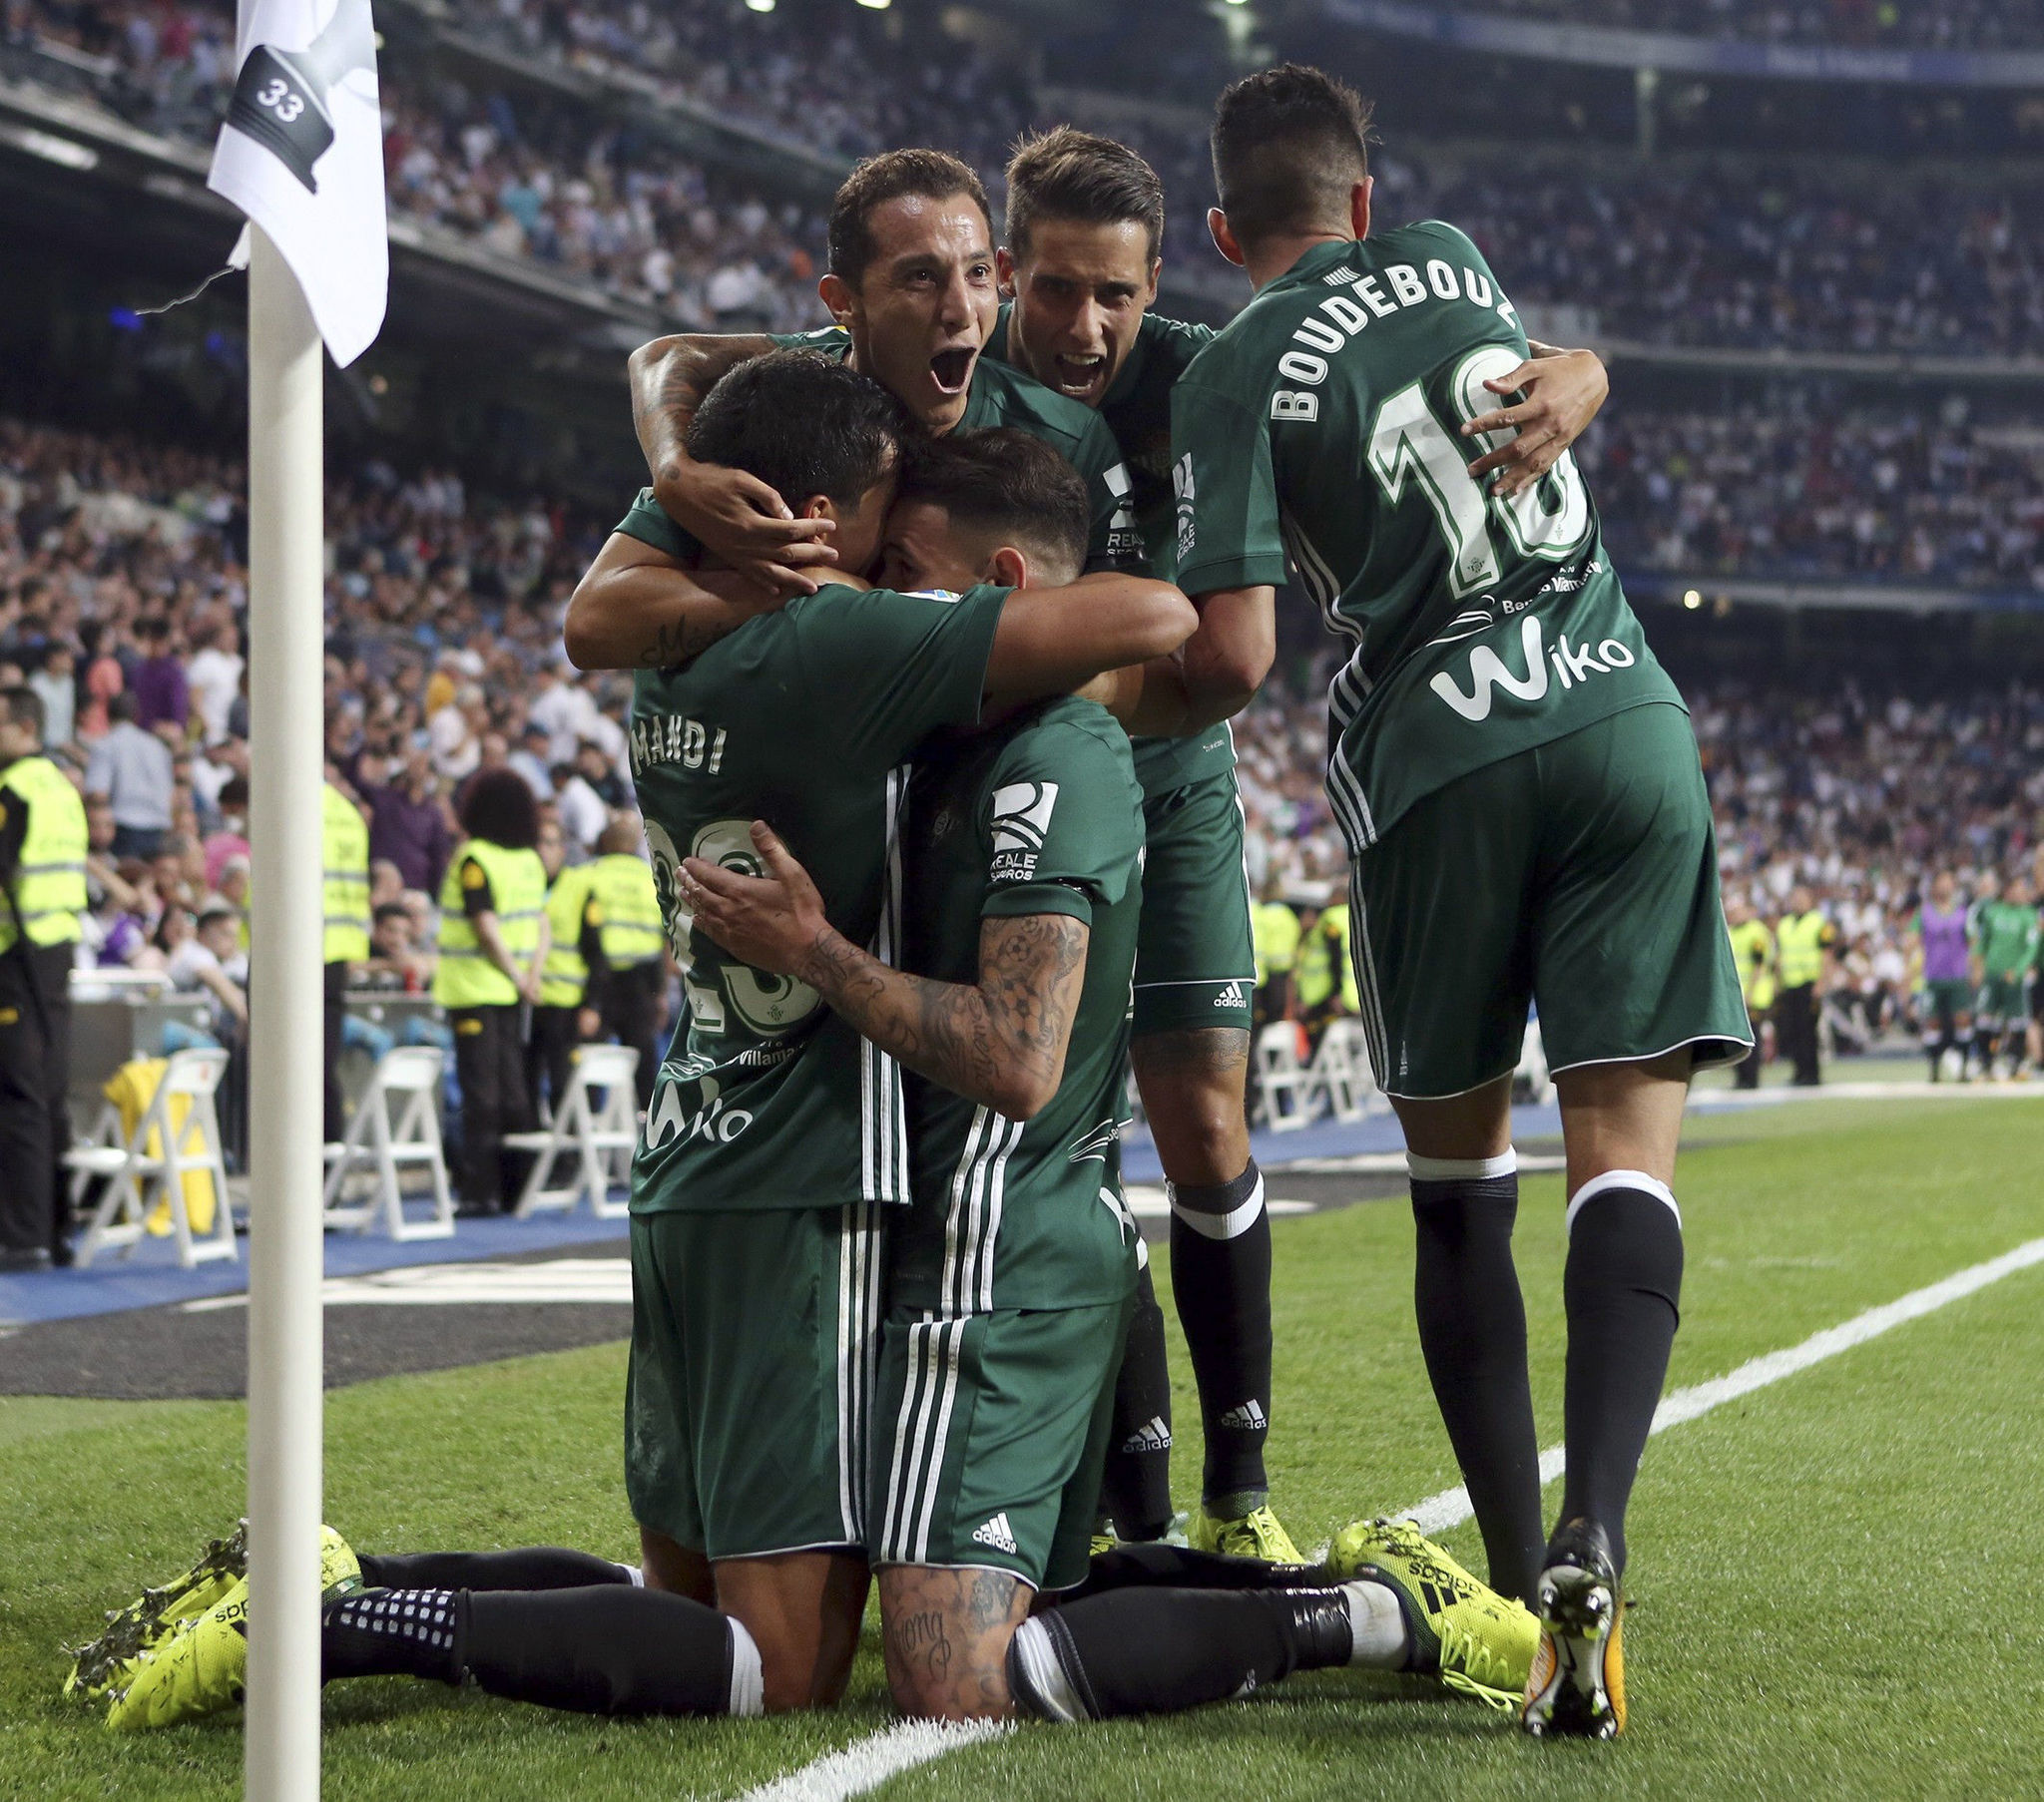 The best images of Real Madrid vs. Real Betis in LaLiga - Chicago Tribune